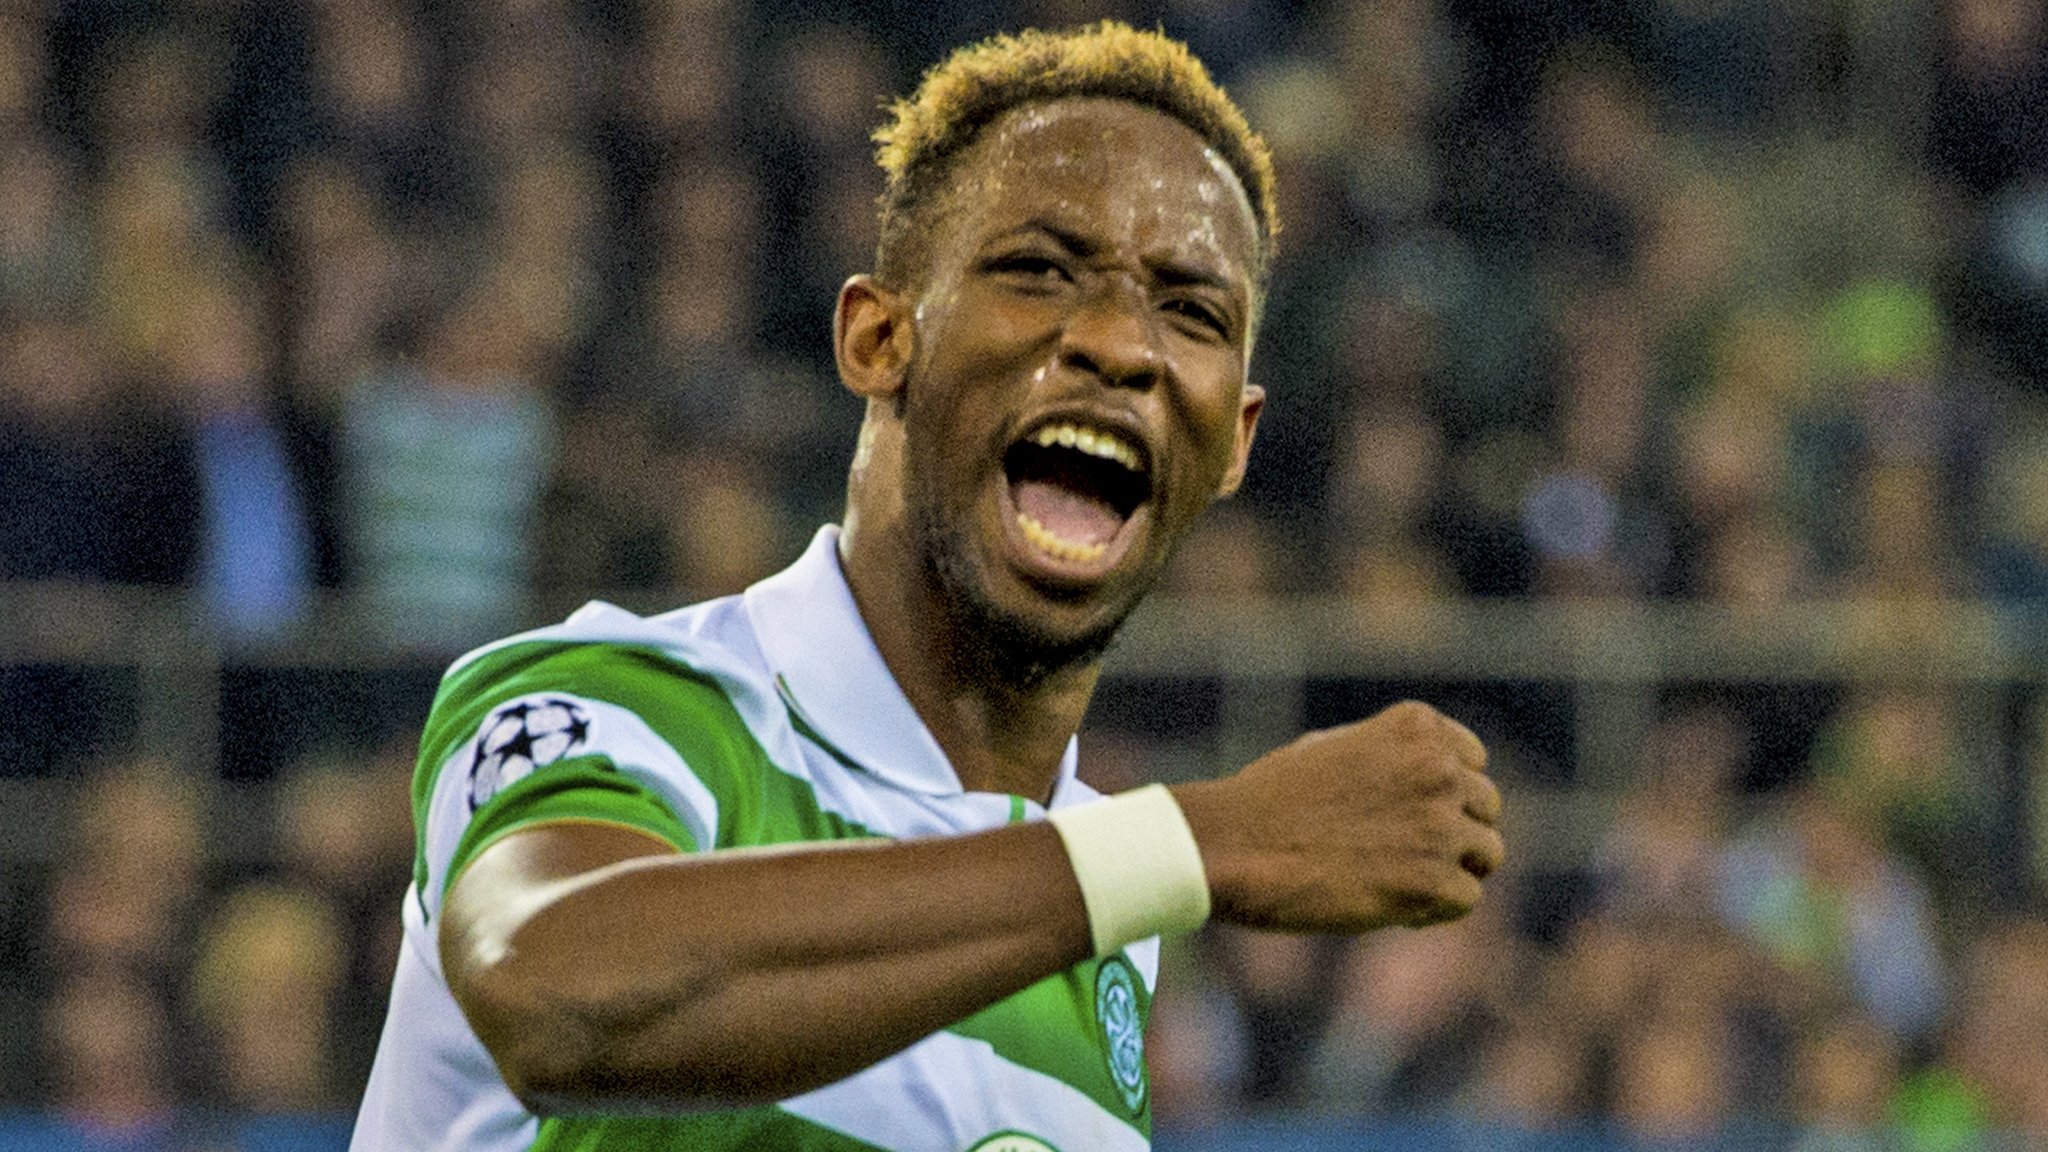 Celtic leave Monchengladbach with head held high